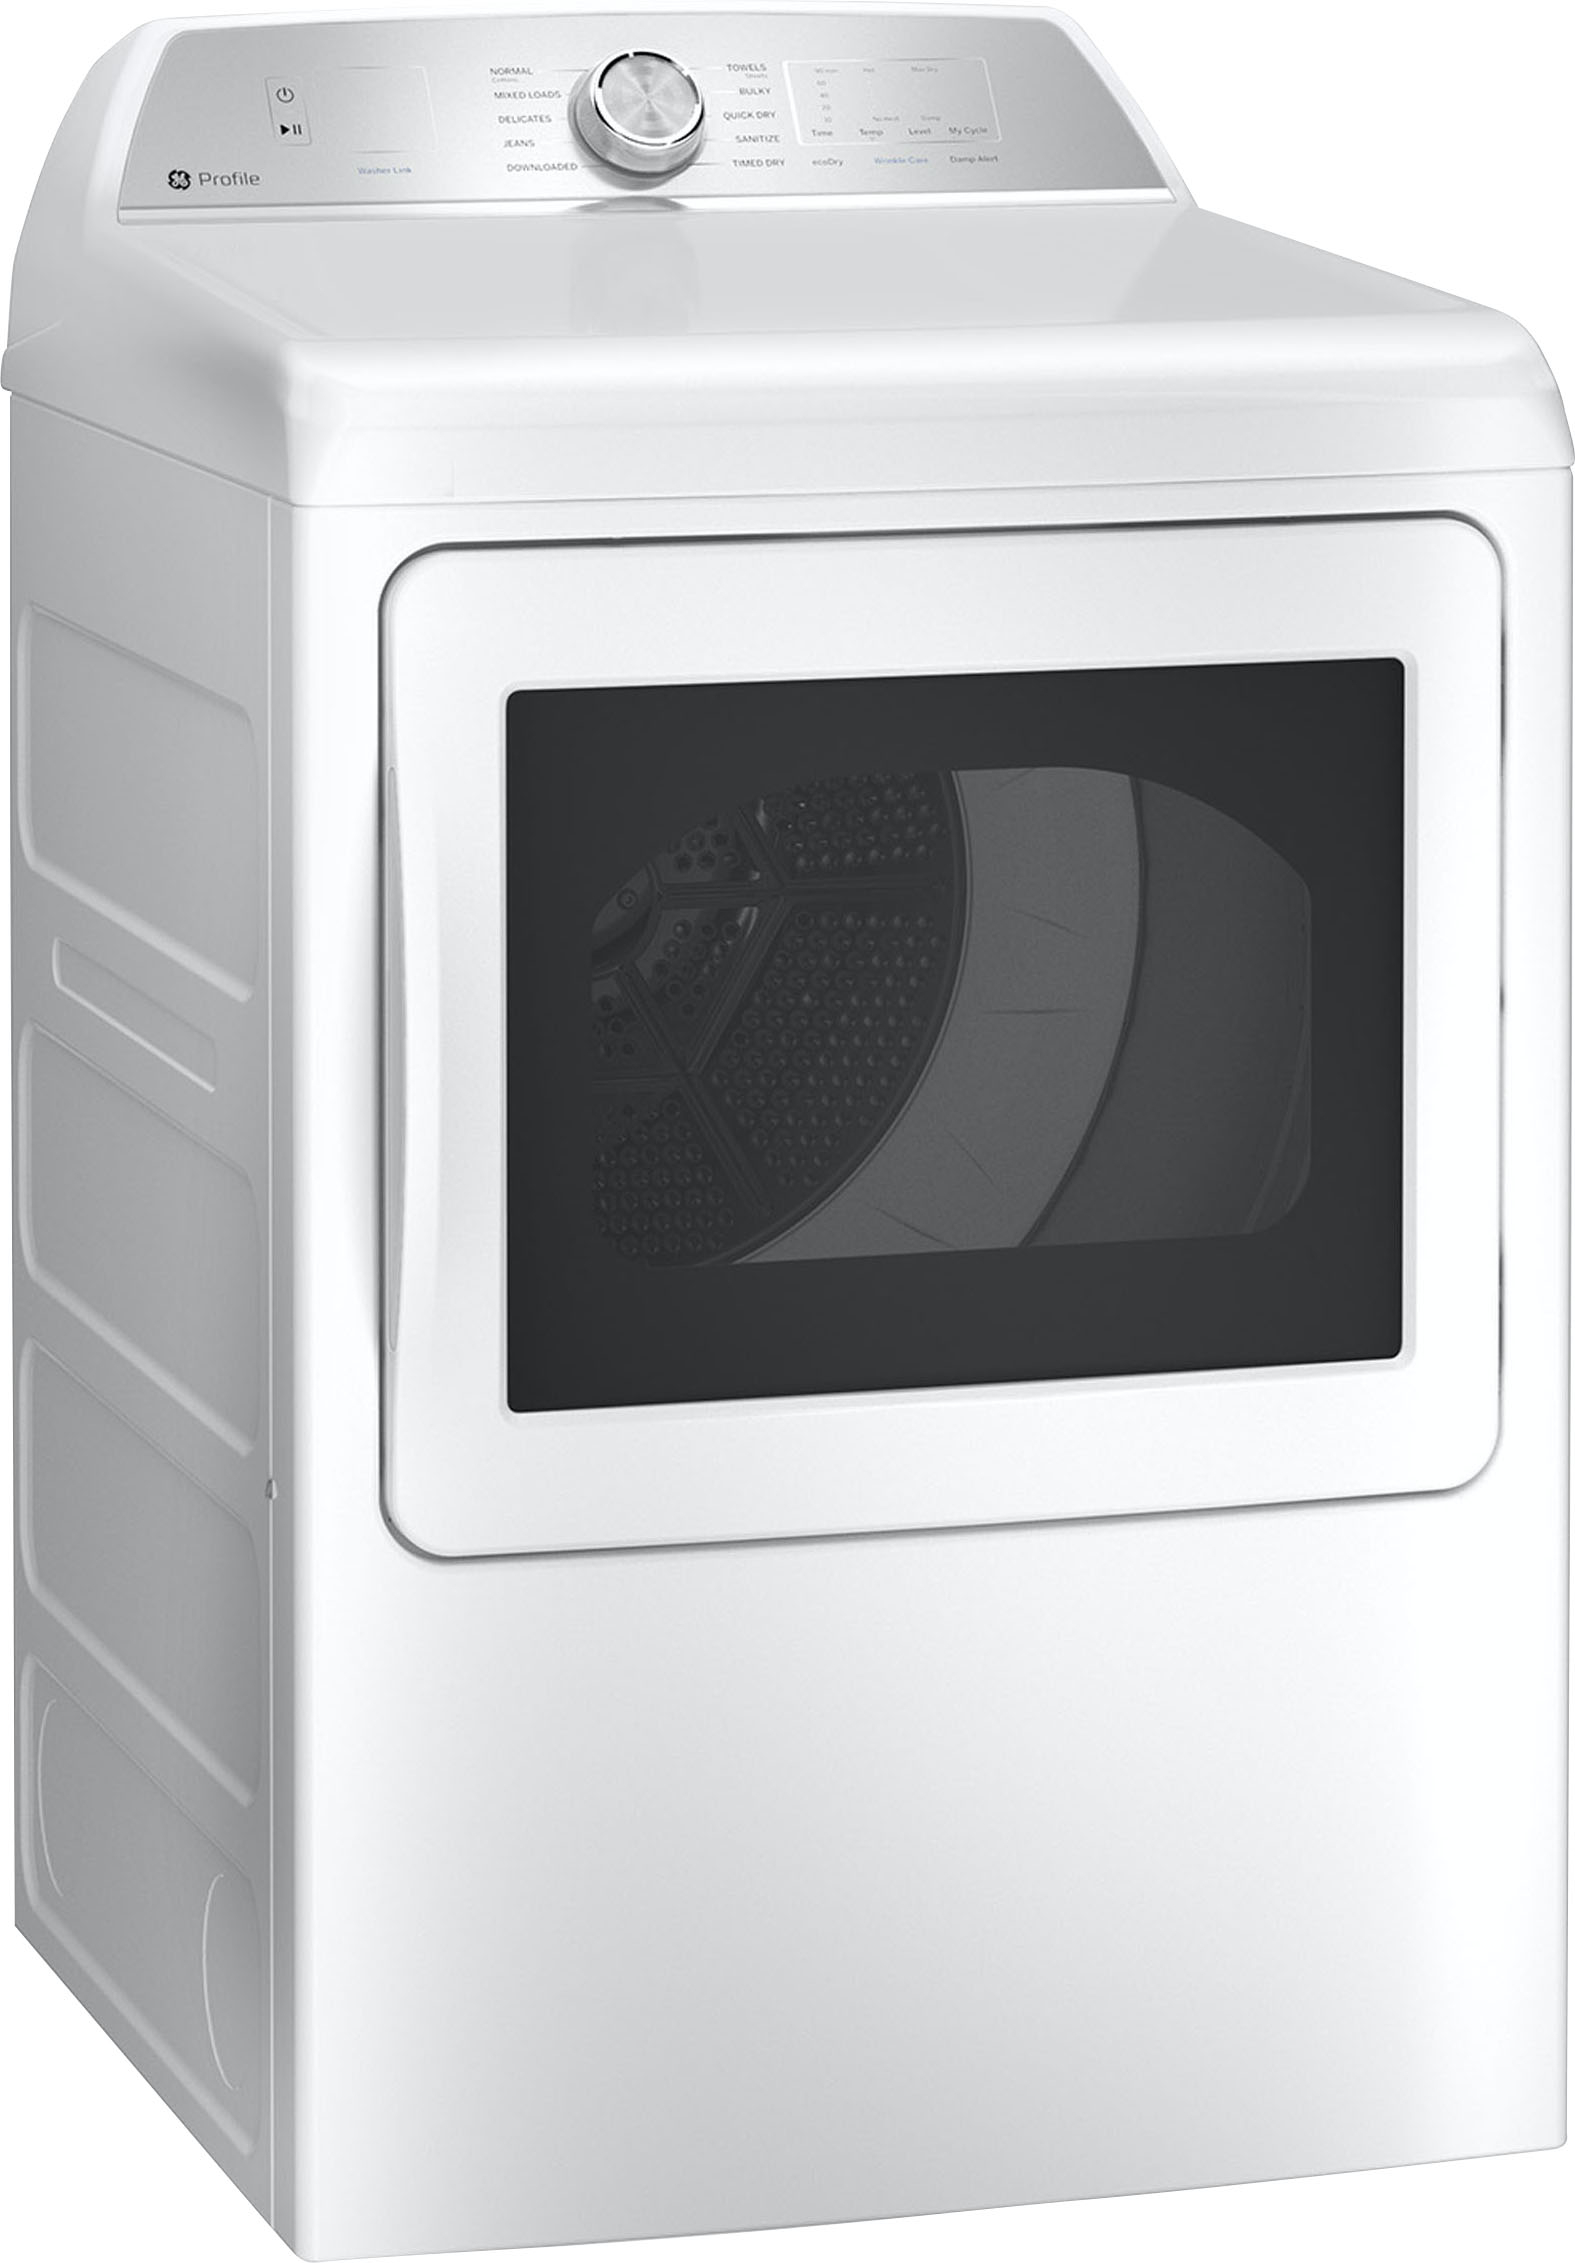 Angle View: GE Profile - 7.4 Cu. Ft. Smart Gas Dryer with Sanitize Cycle and Sensor Dry - White